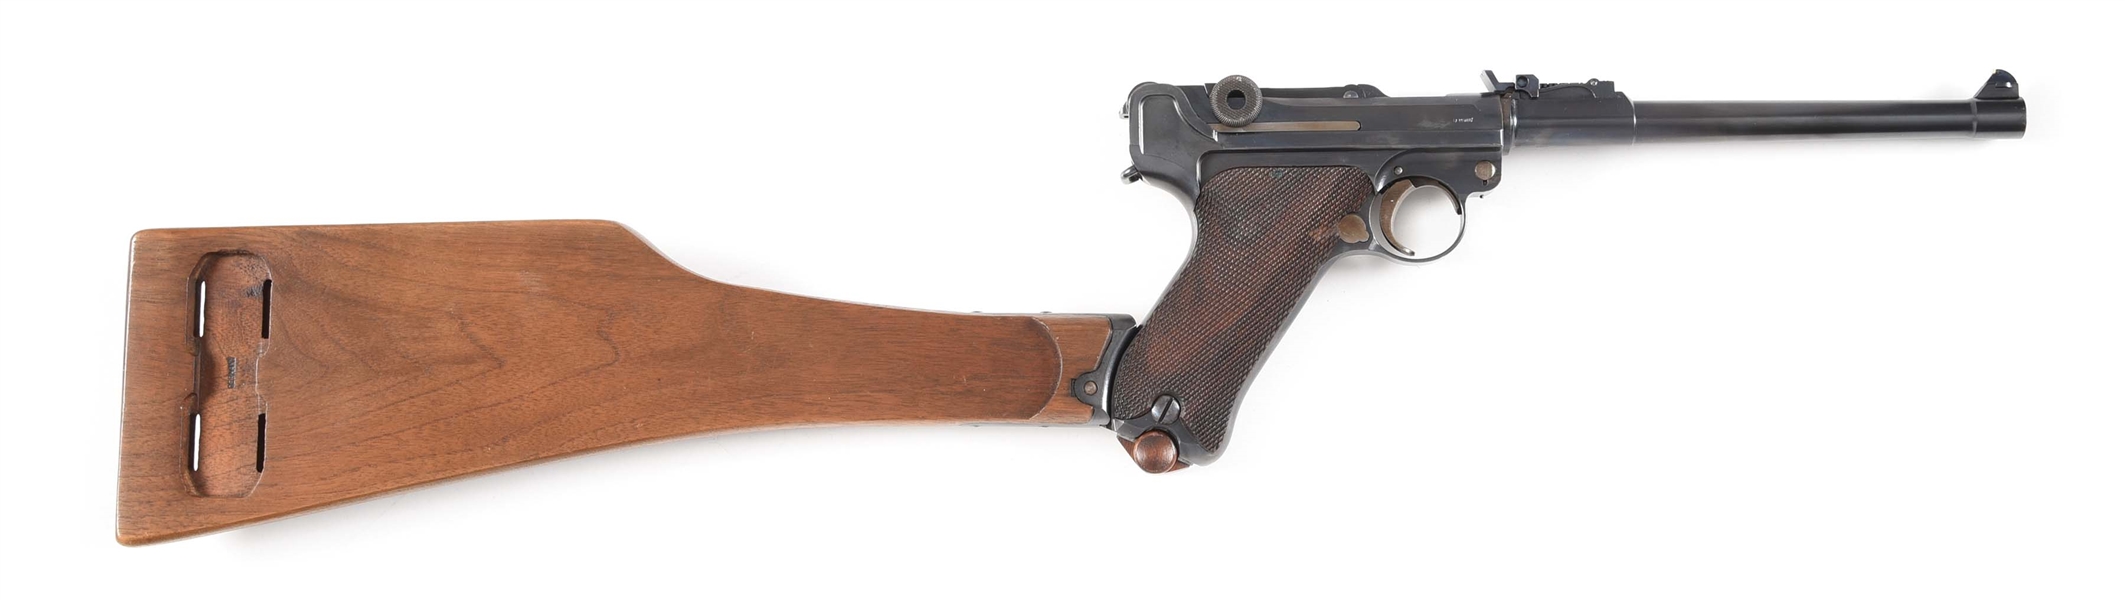 (C) DWM COMMERCIAL ARTILLERY LUGER WITH STOCK AND HOLSTER.